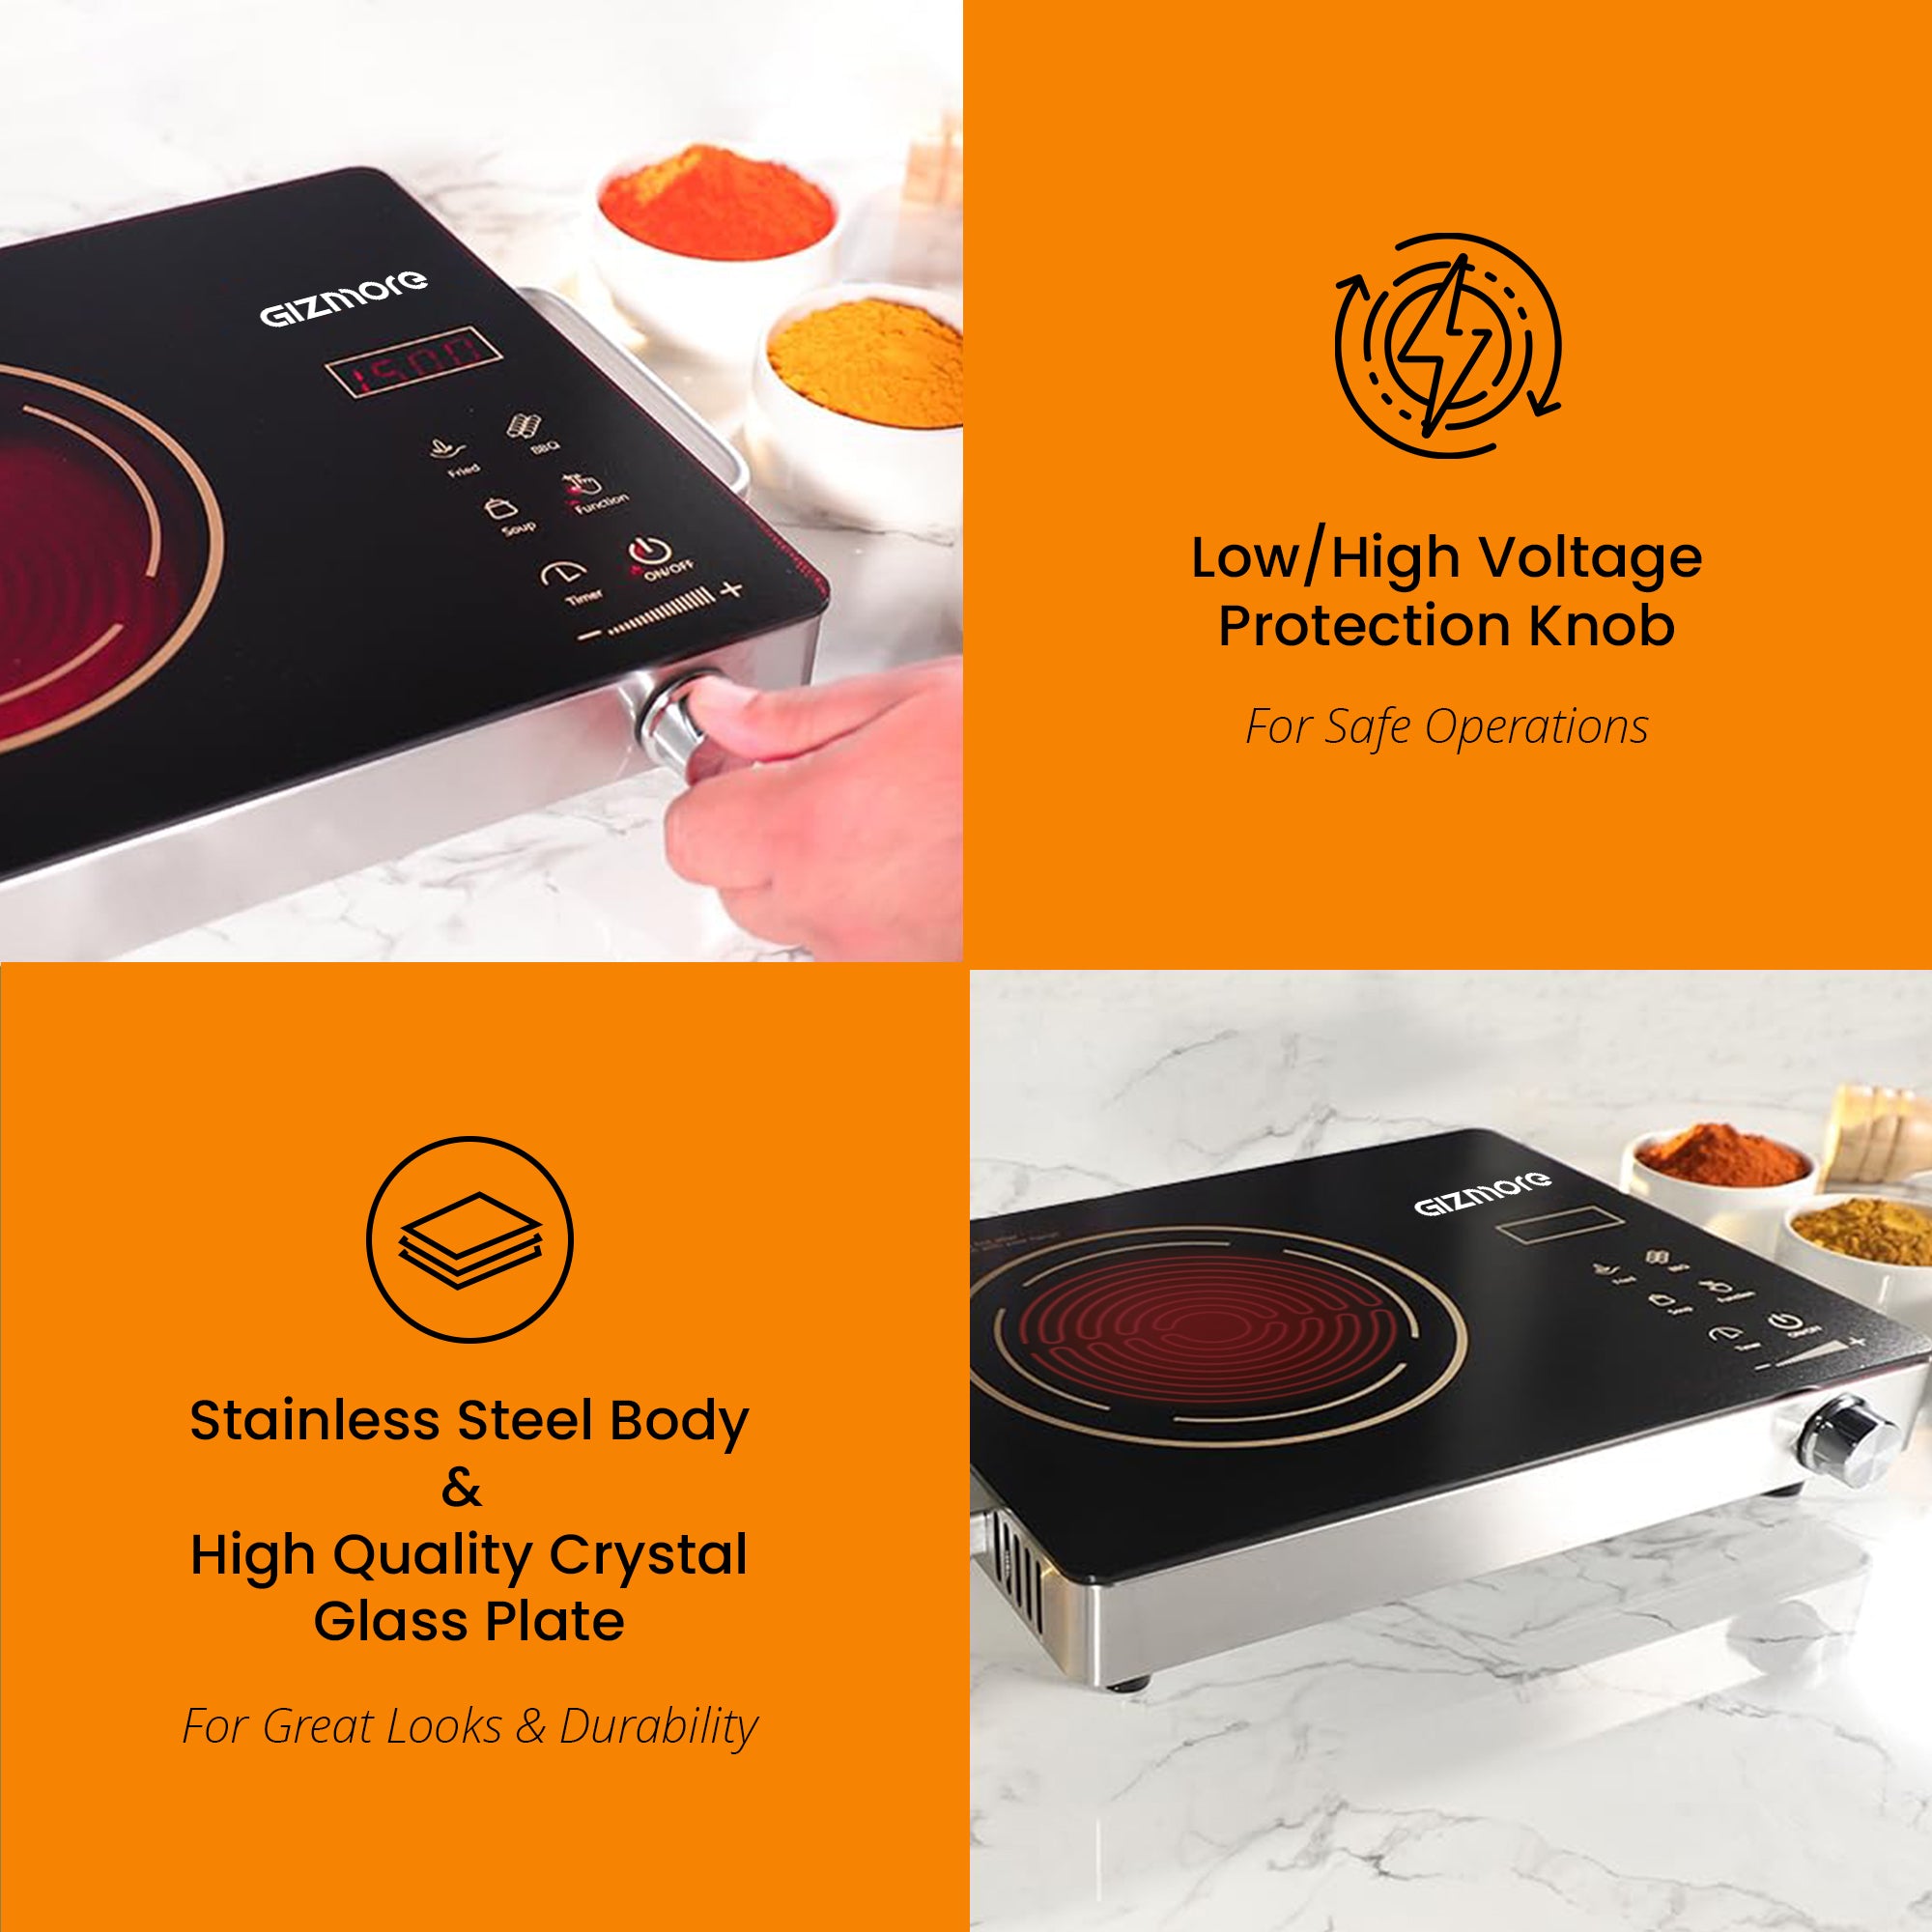 GIZMORE 2200 W Infrared Induction Cooktop Compatible with All Utensils| Crystal Glass & Touch Control| Auto Cooling System |Digital Display |Temperature Adjustability